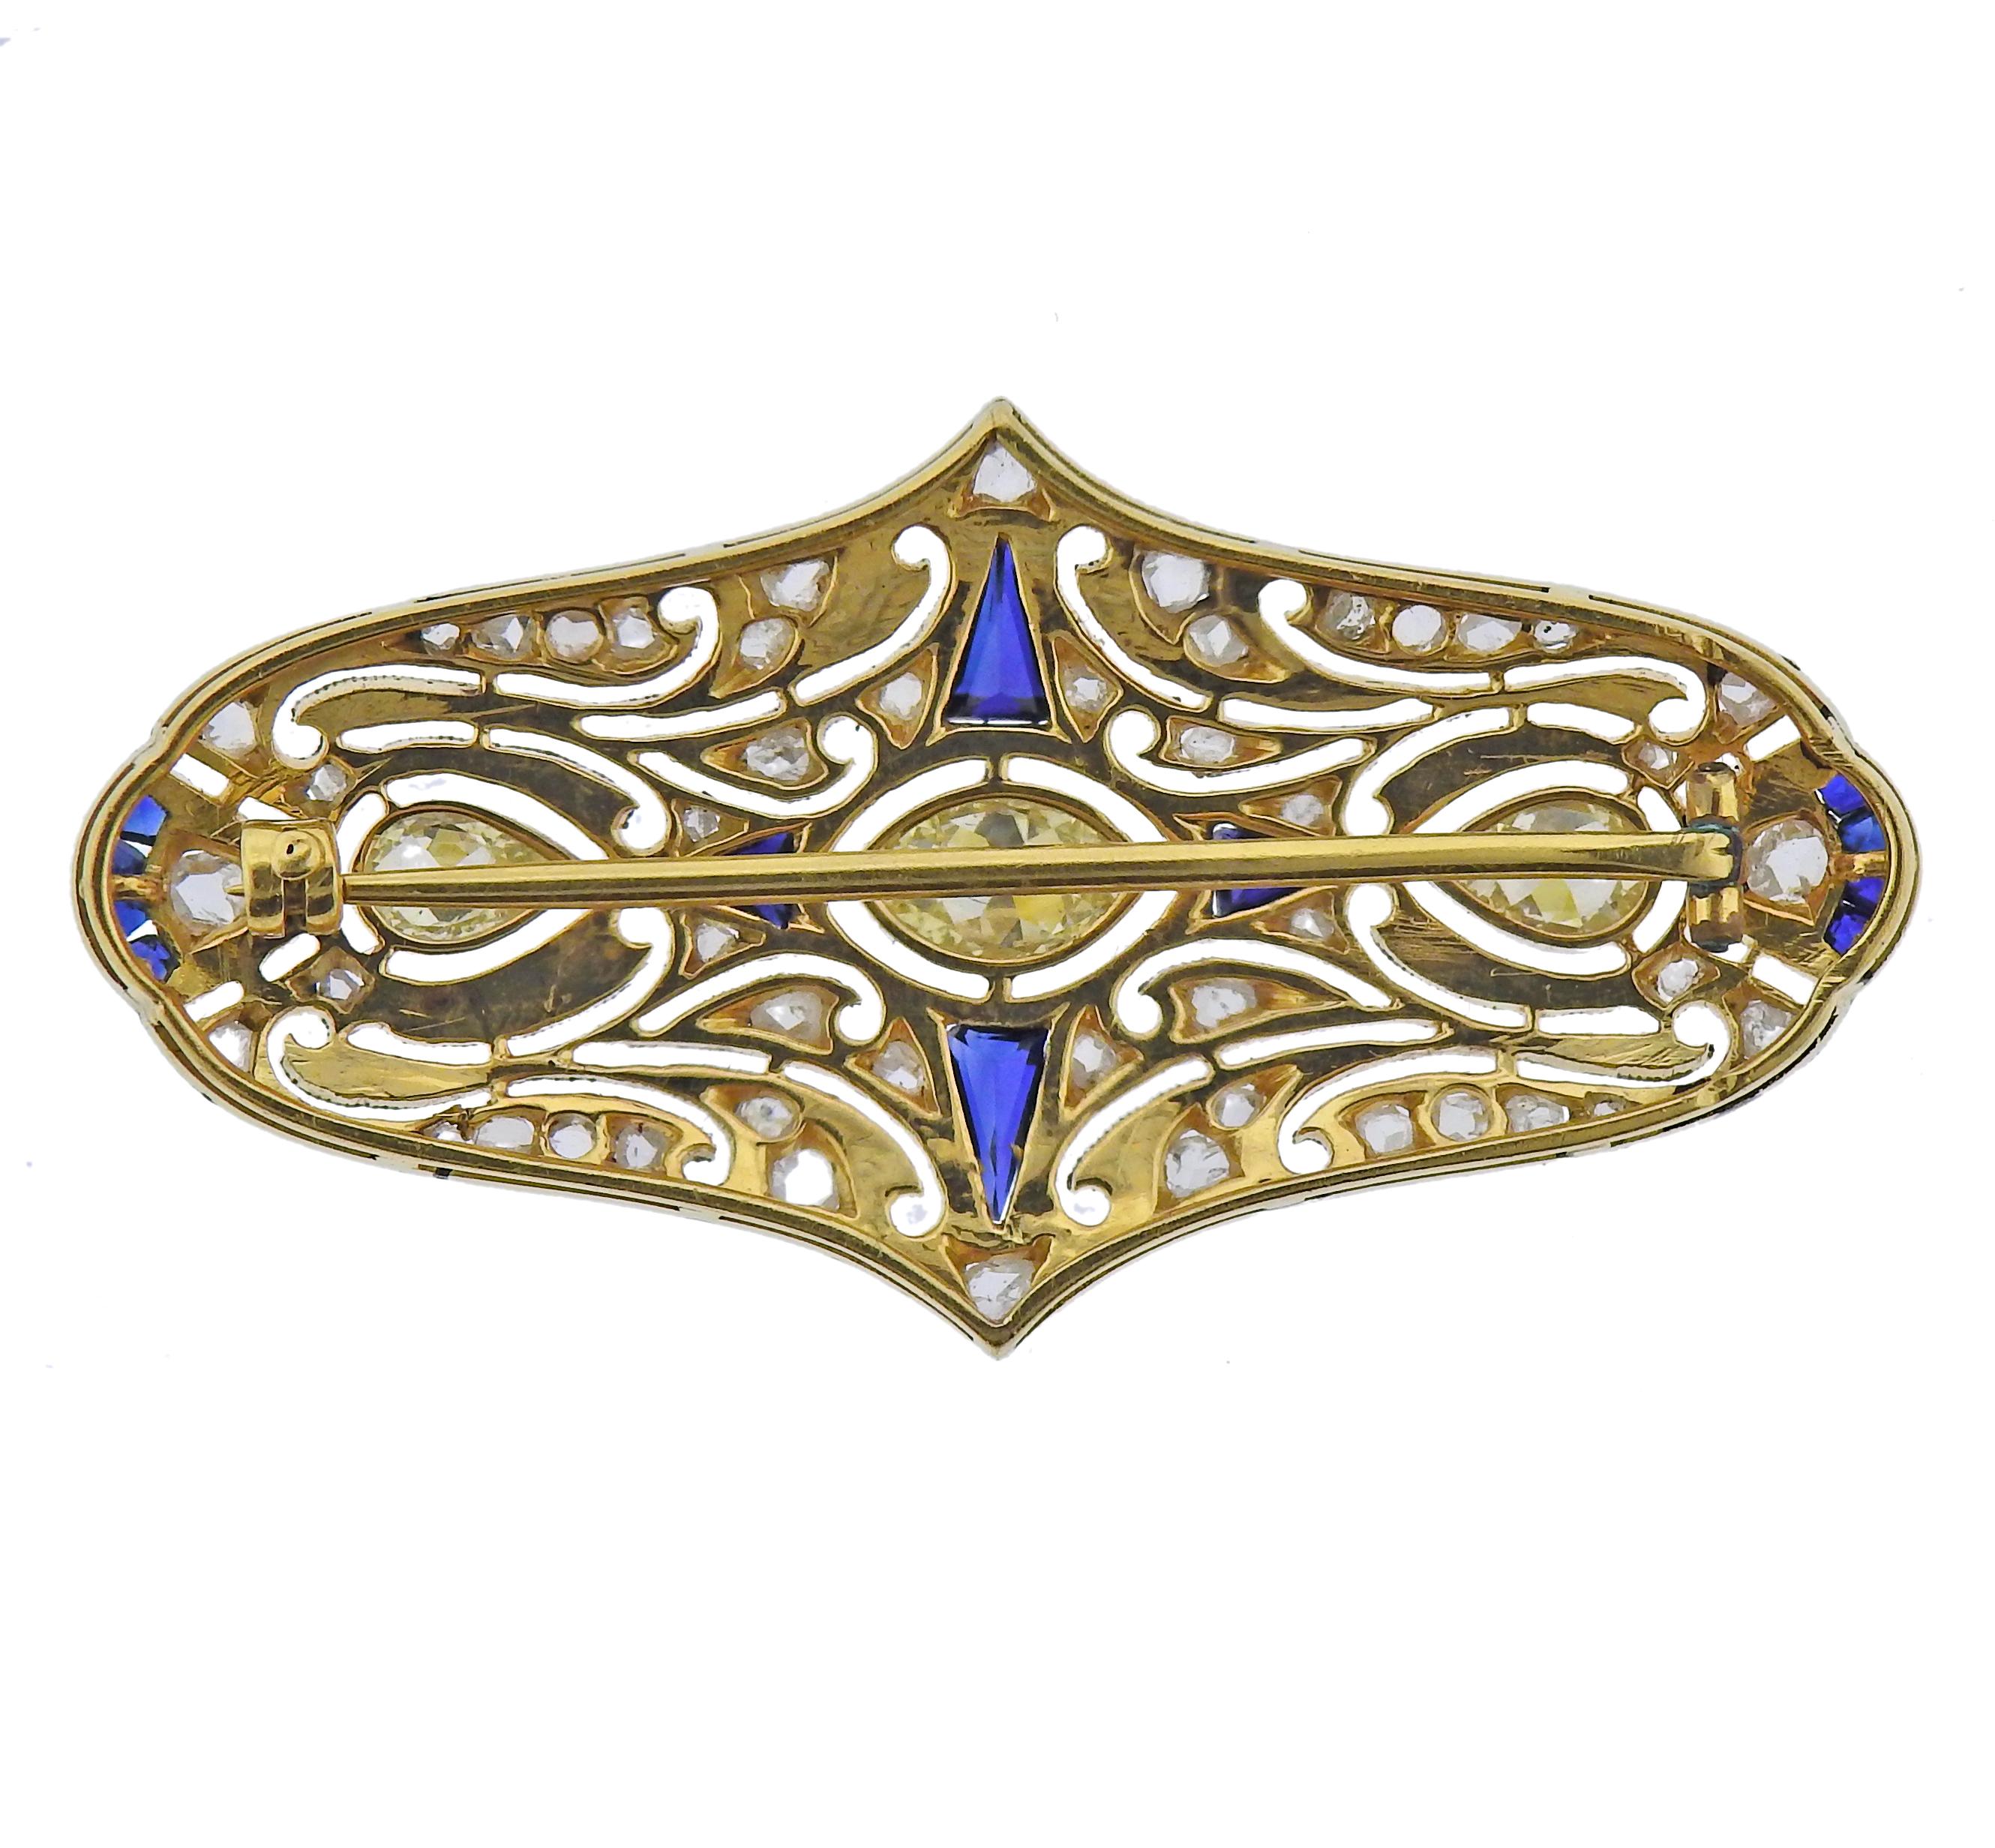 Art Deco 14k gold brooch, with sapphires and approx. 0.75ctw in three large pearl and marquise 3 diamonds, surrounded with smaller rose cut diamonds. Brooch measures 45mm x 25mm. Weight - 7.7 grams.